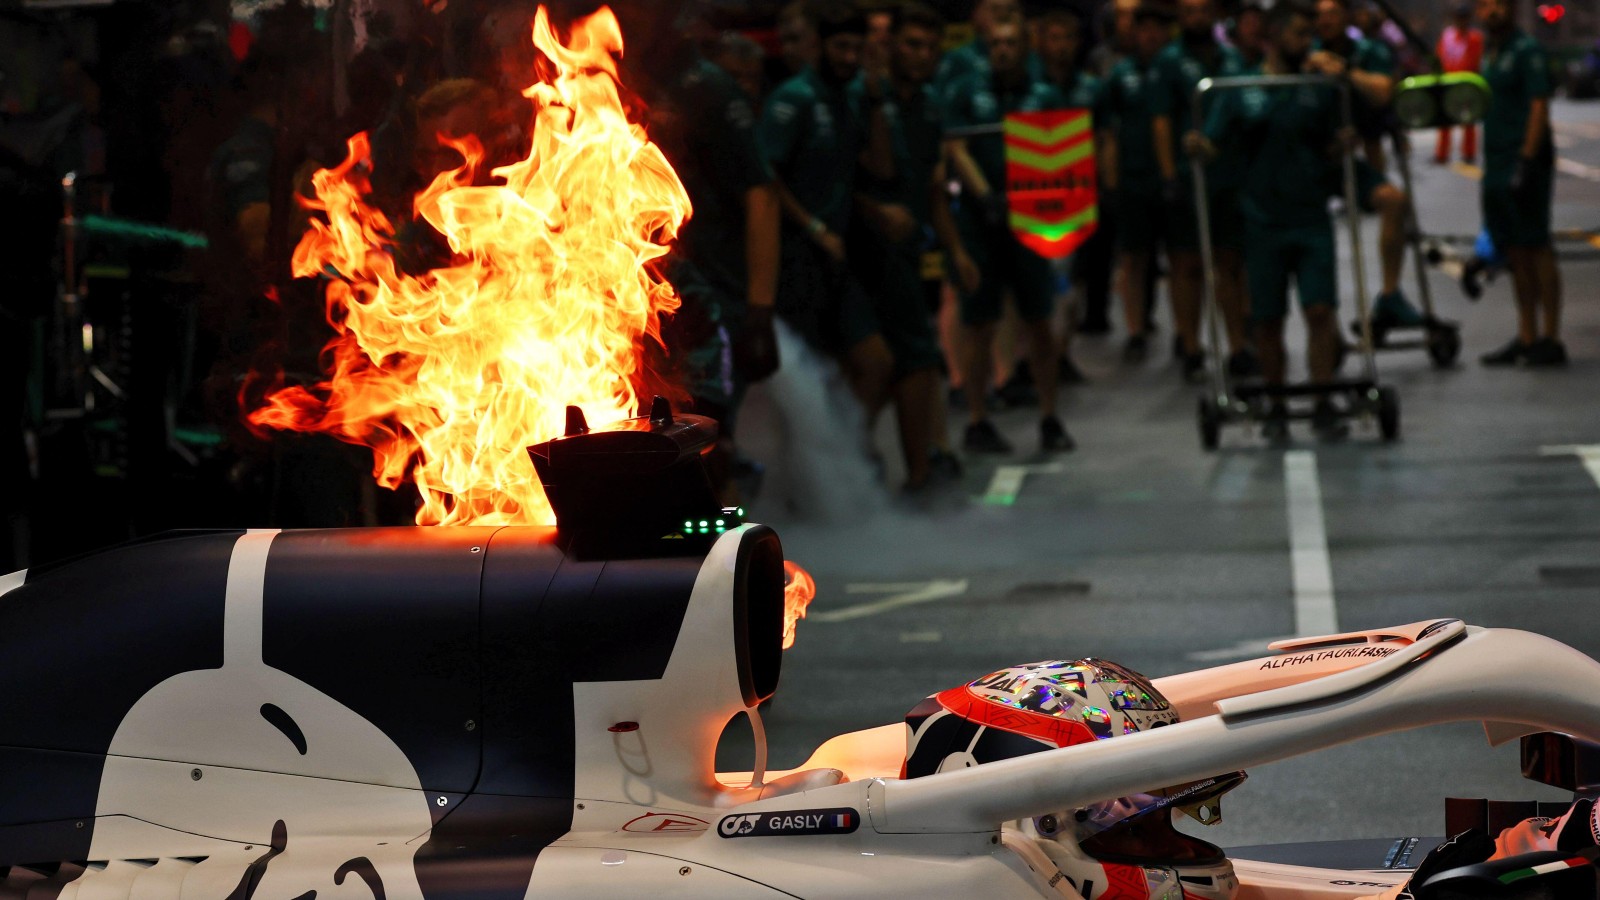 Fire coming from the AlphaTauri driven by Pierre Gasly. Singapore, September 2022.